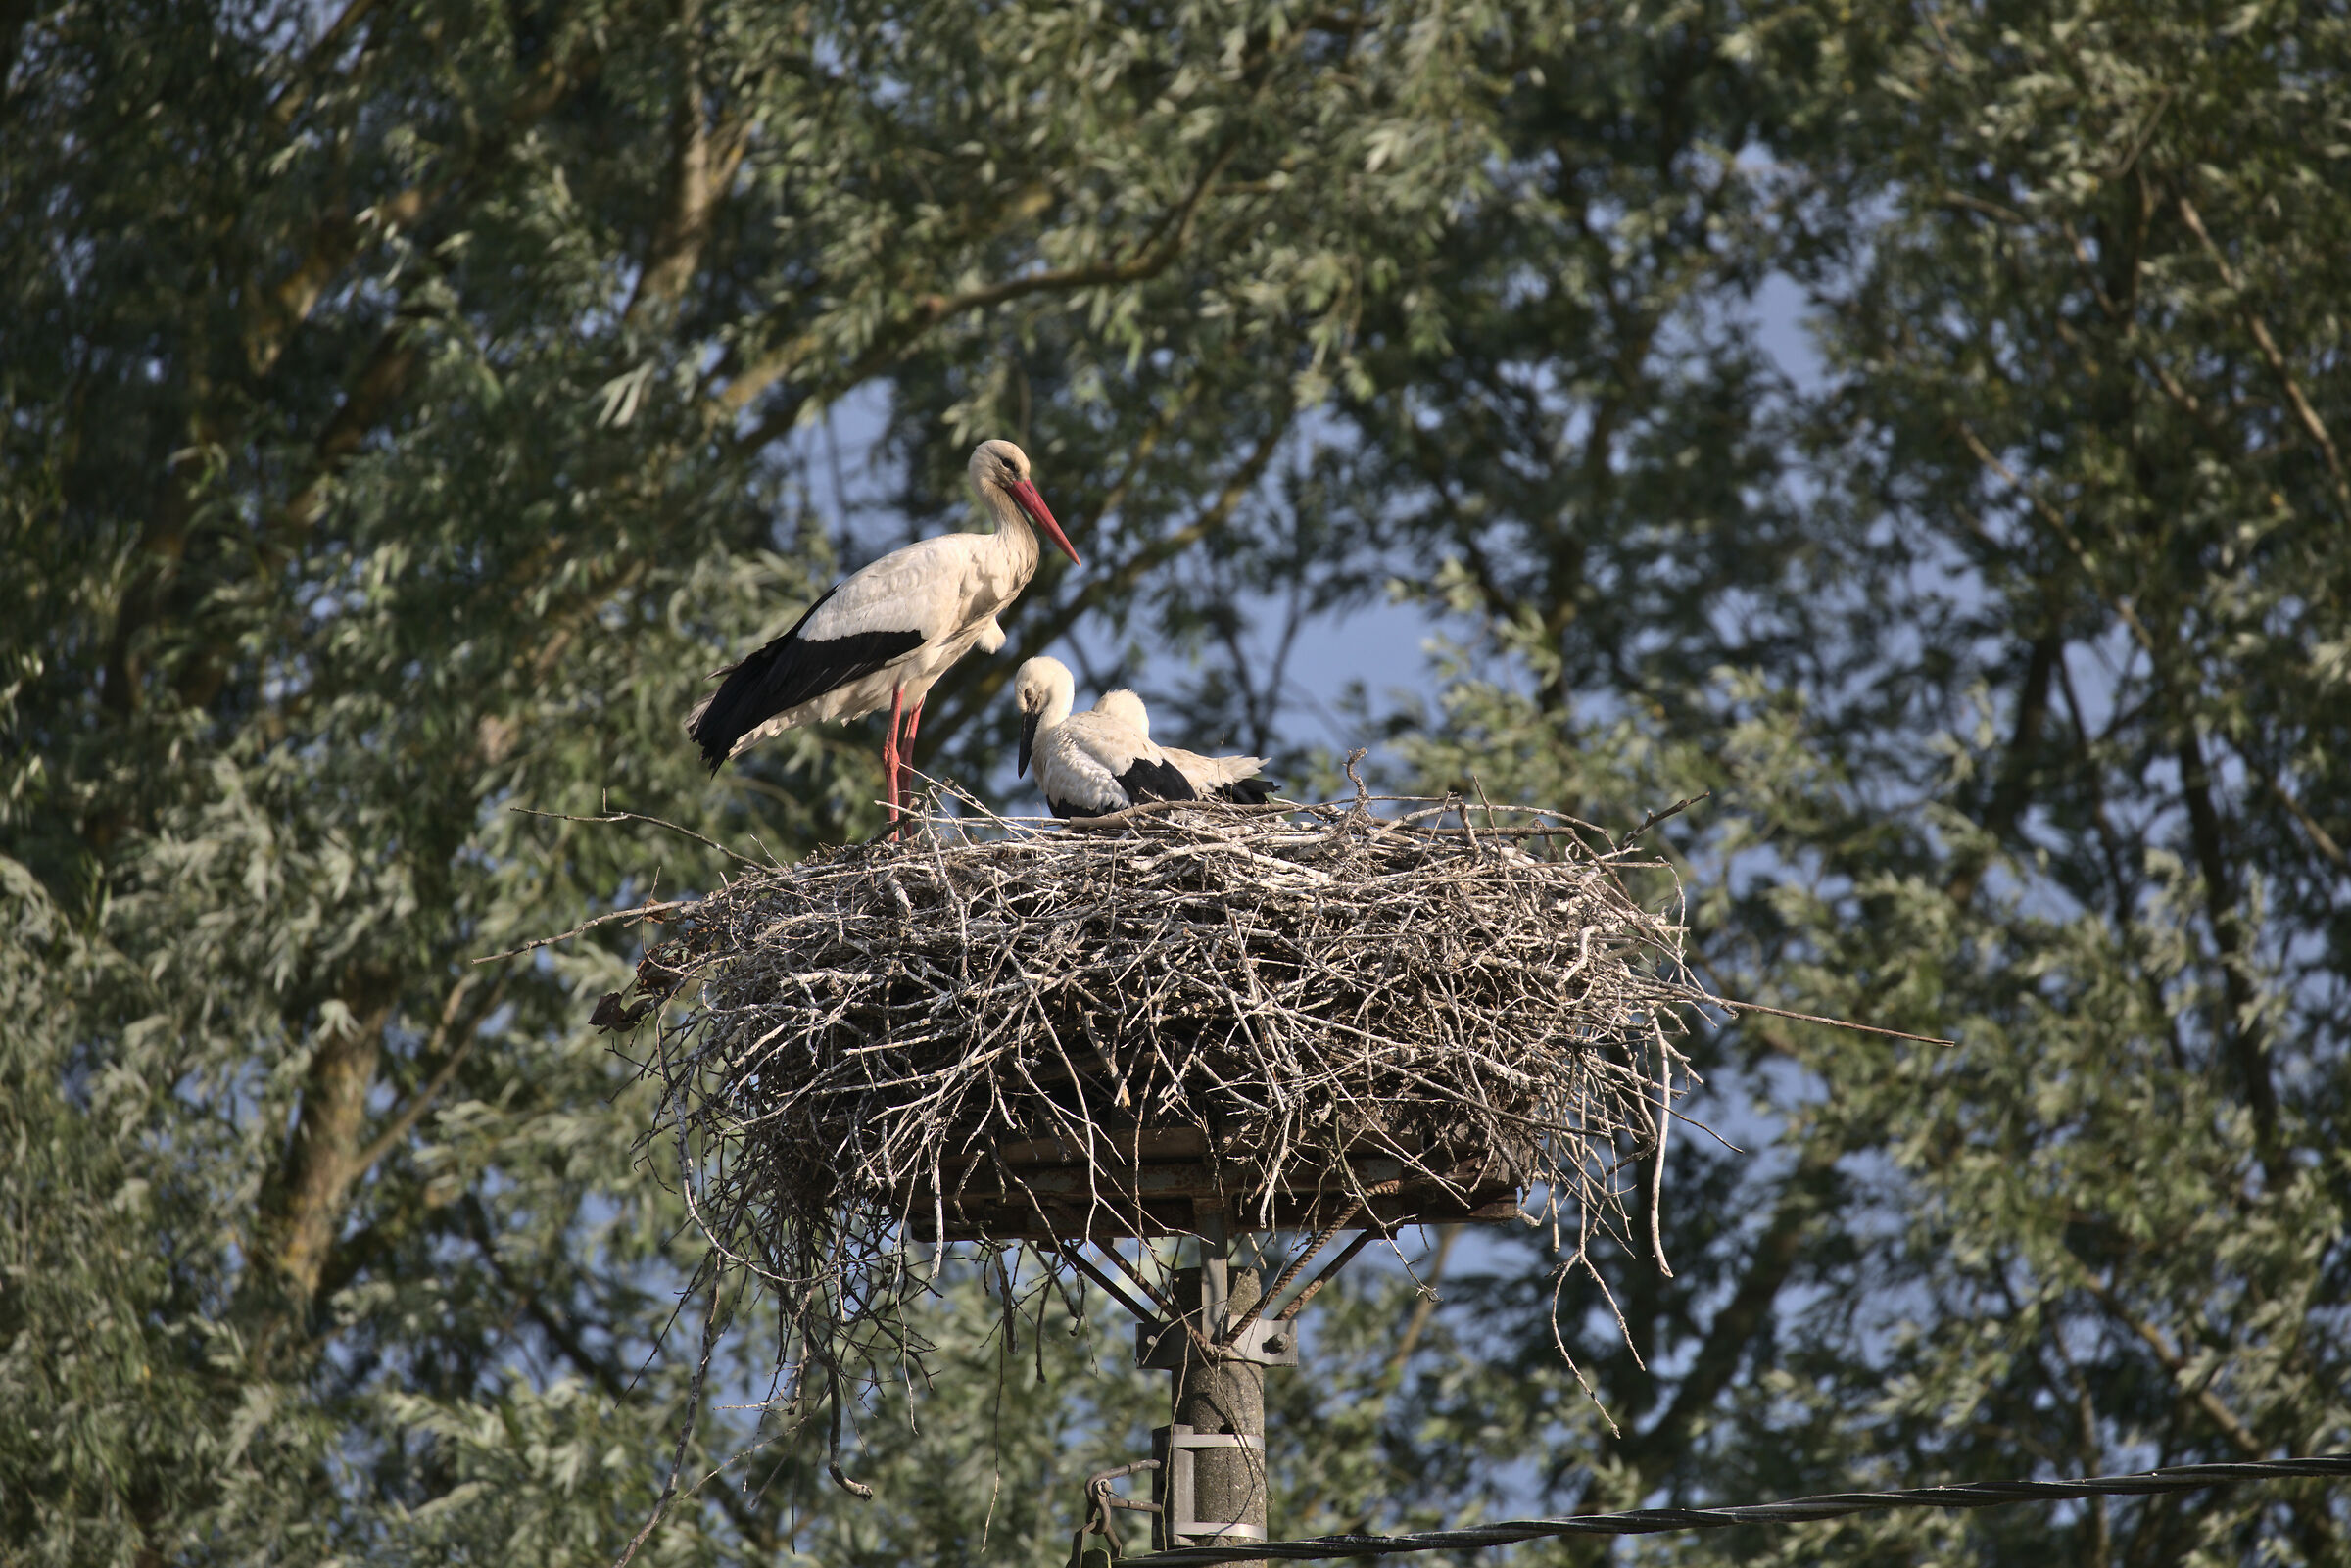 Family of storks that seem to be in isolation....